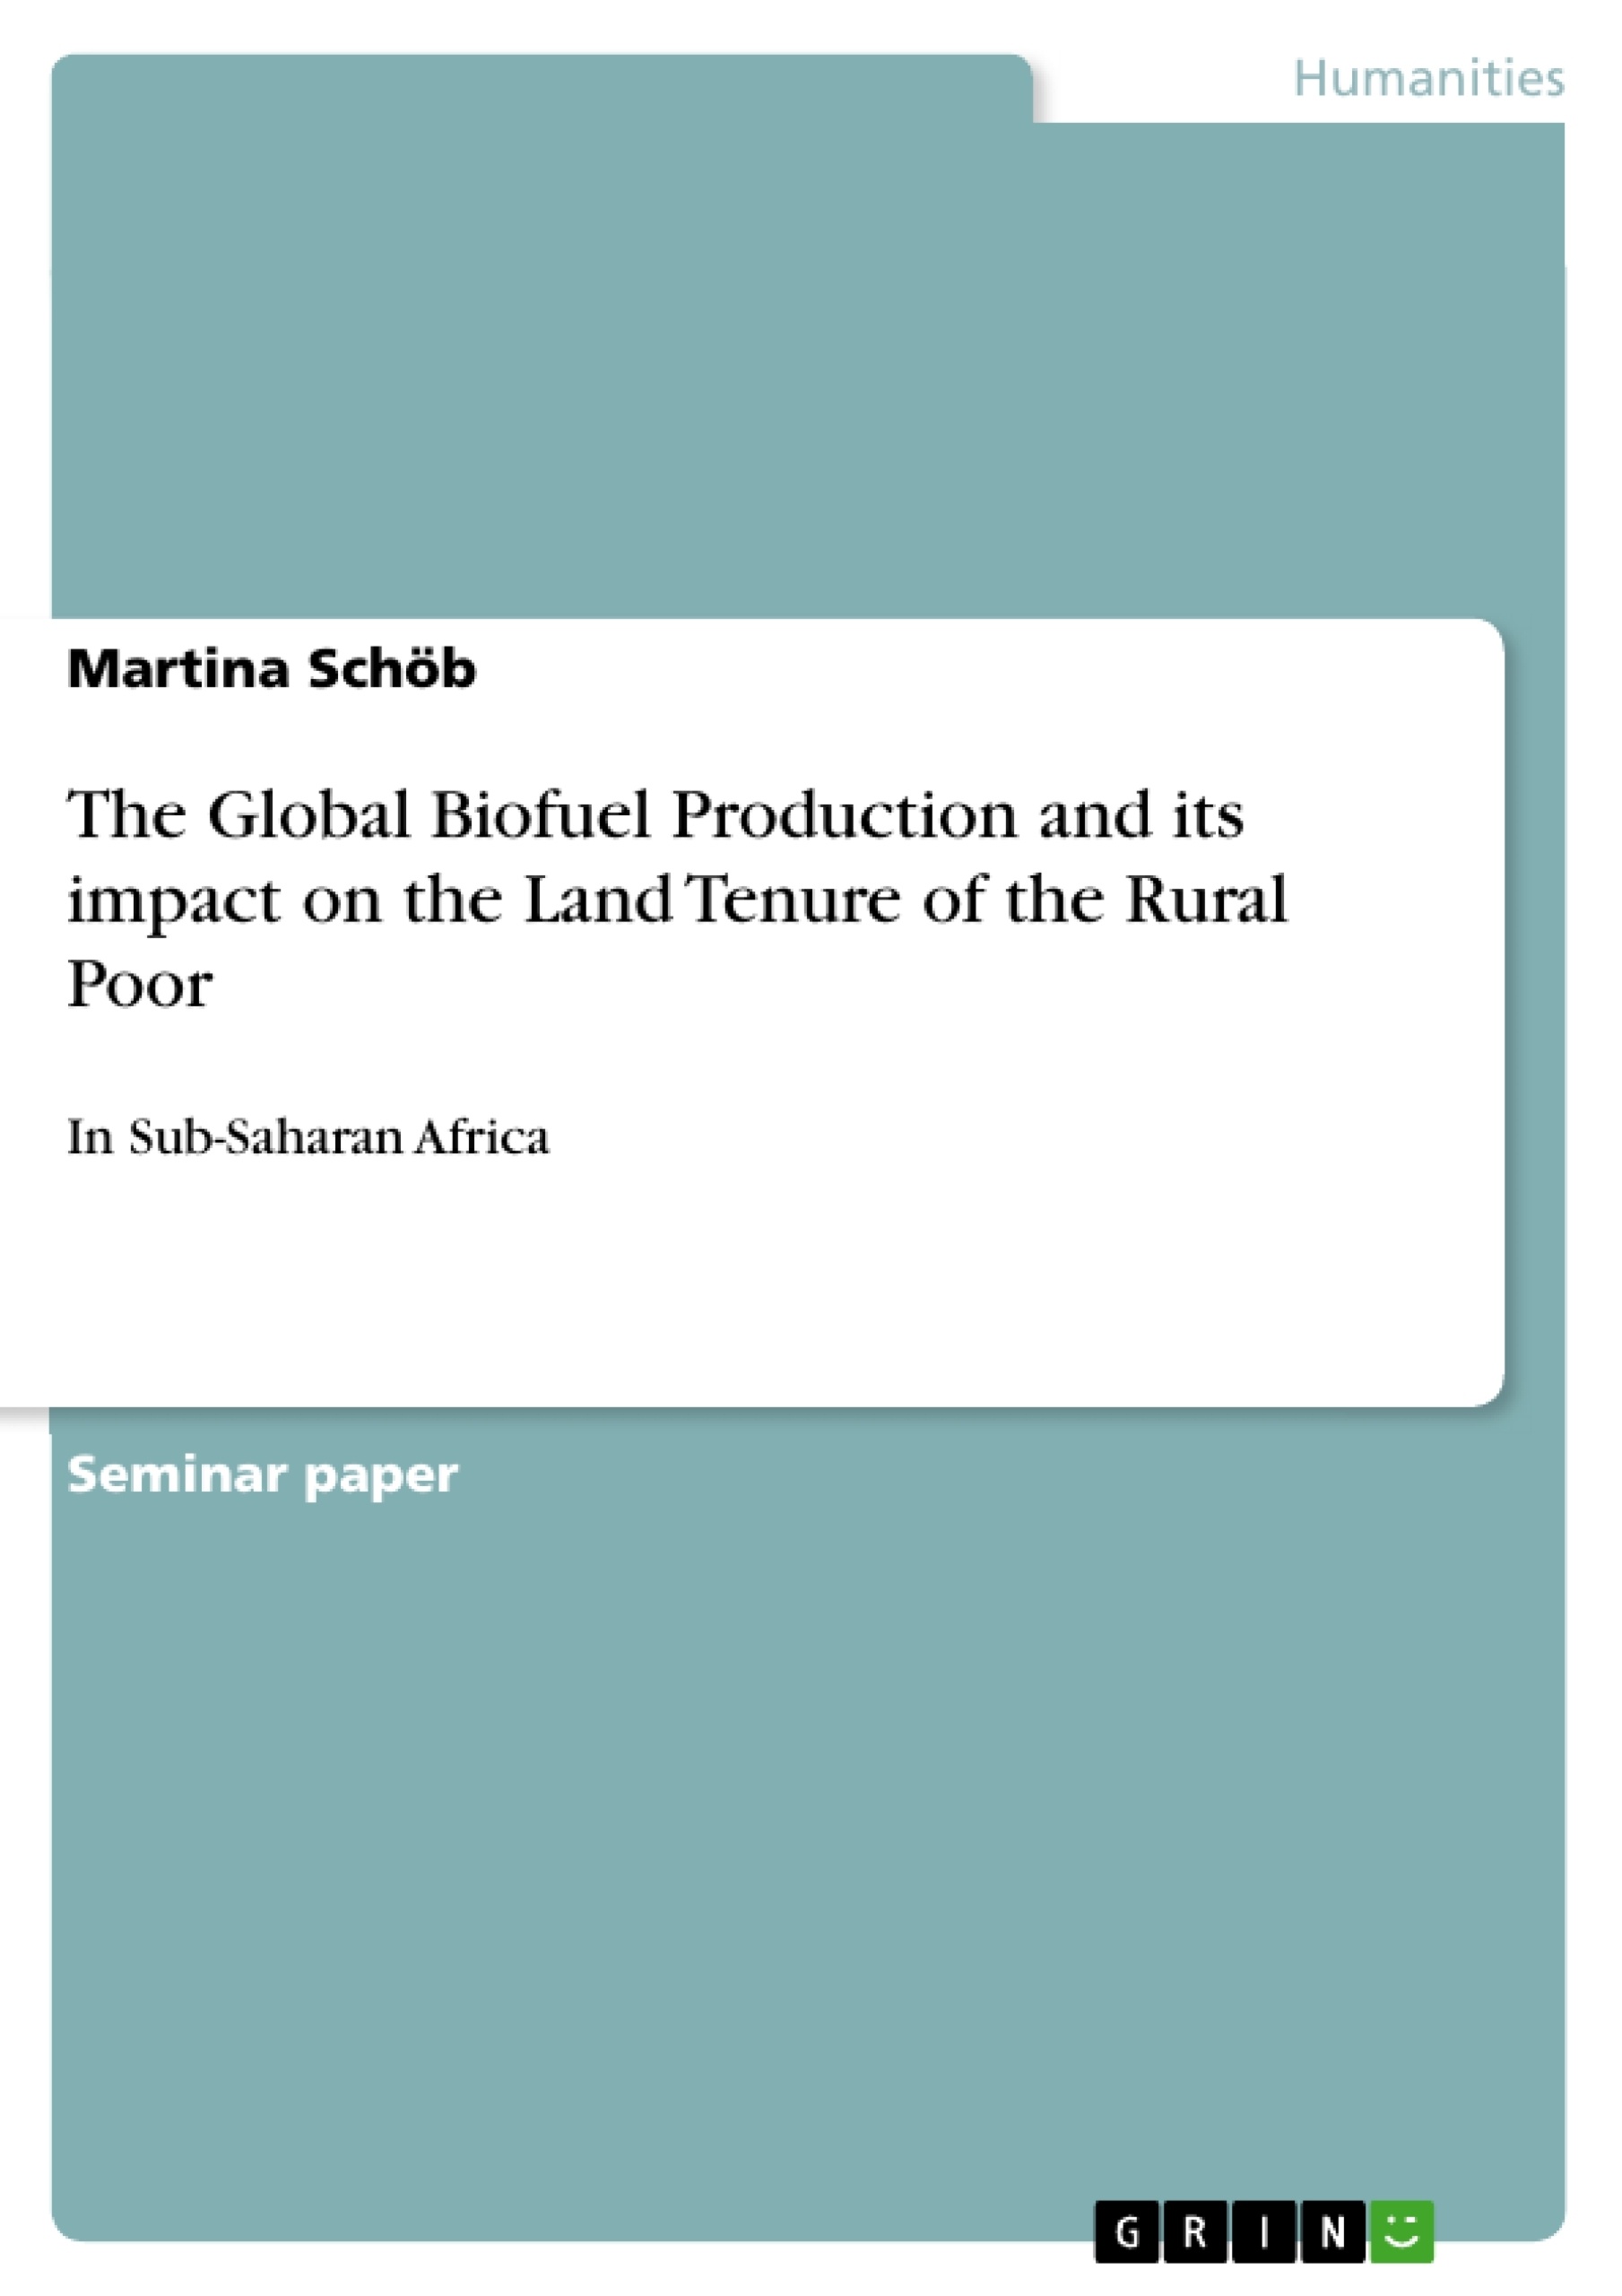 Título: The Global Biofuel Production and its impact on the Land Tenure of the Rural Poor